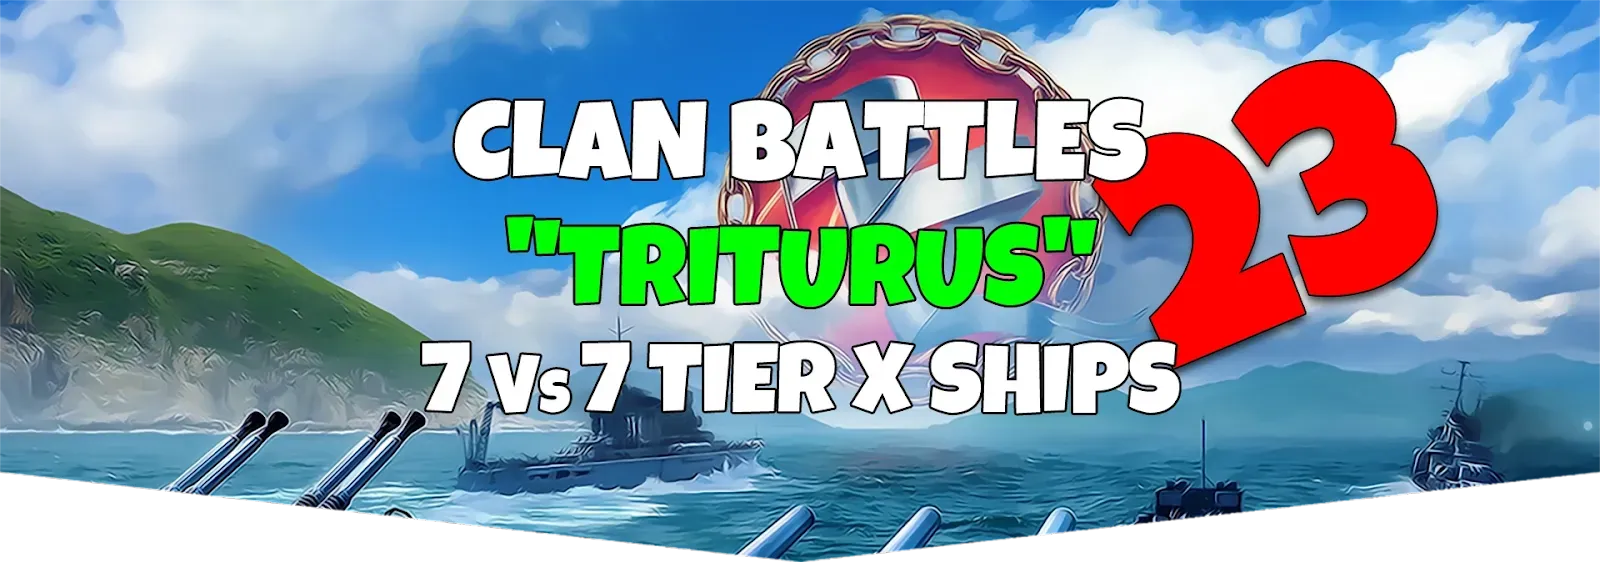 Image of details about clan battles 23